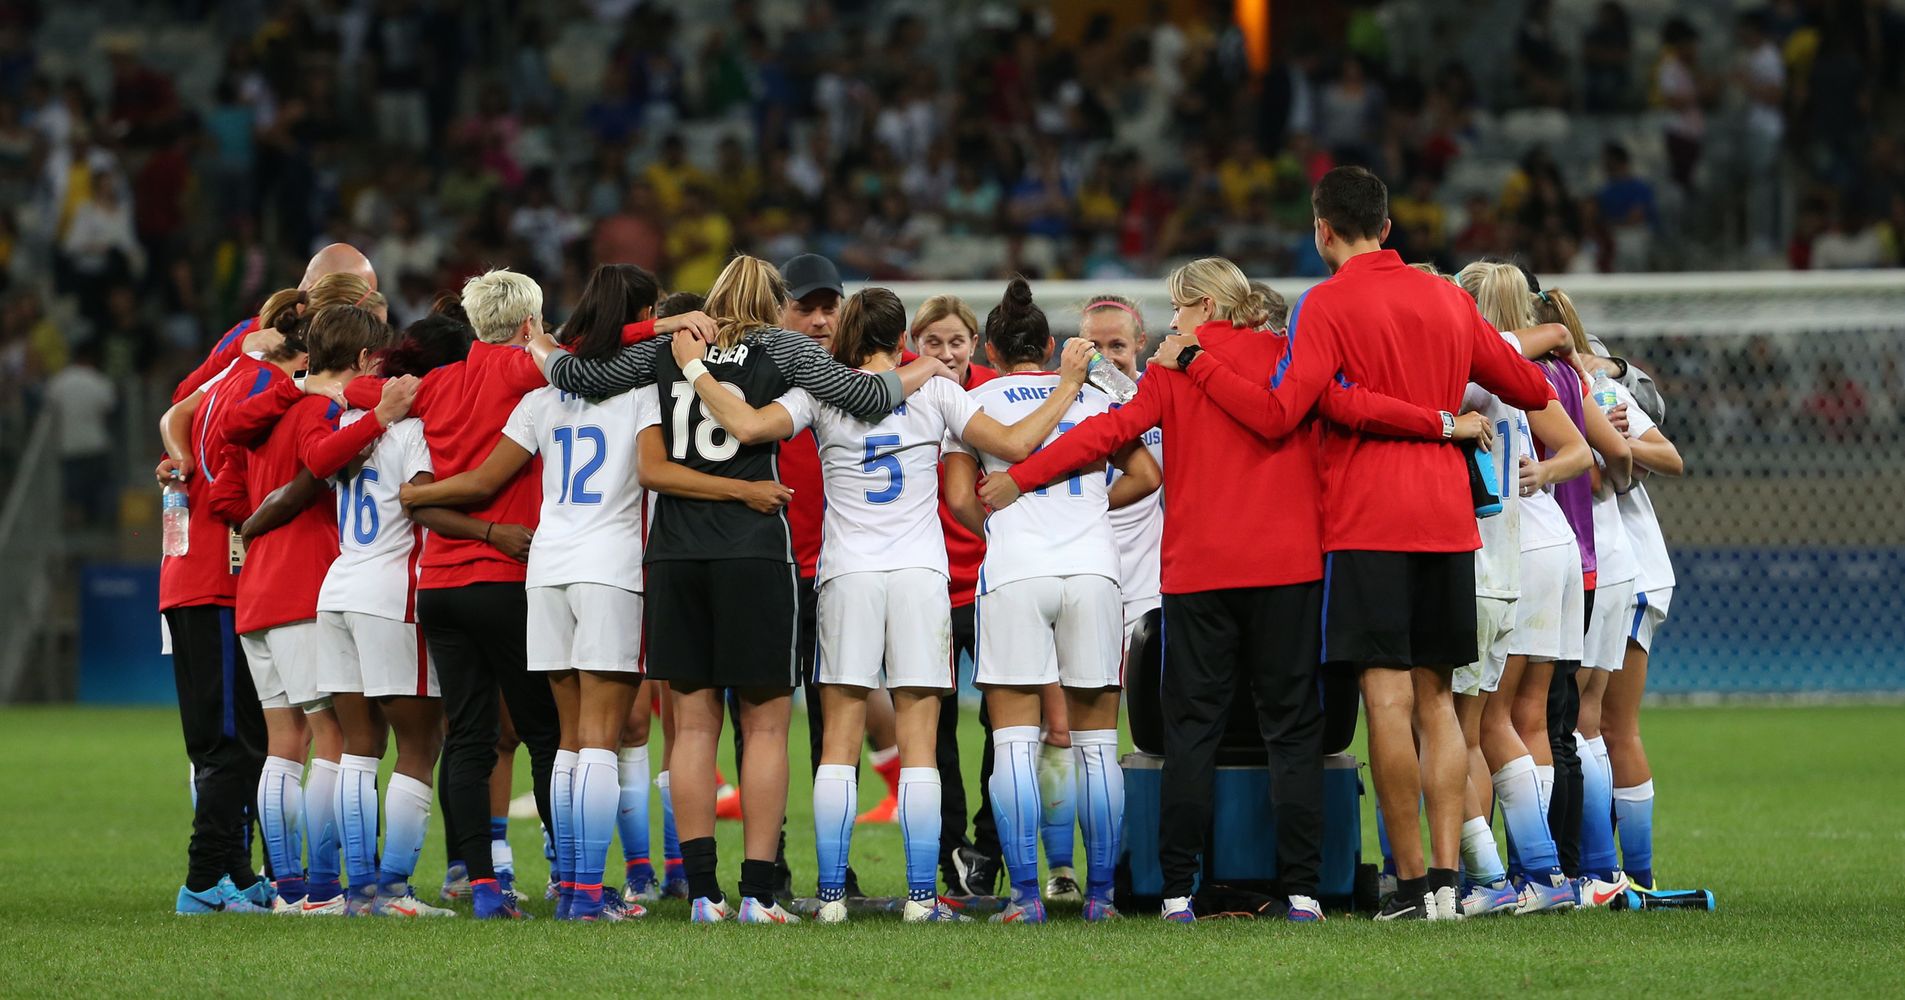 U S Women S Soccer Team Sues Federation For Equal Pay